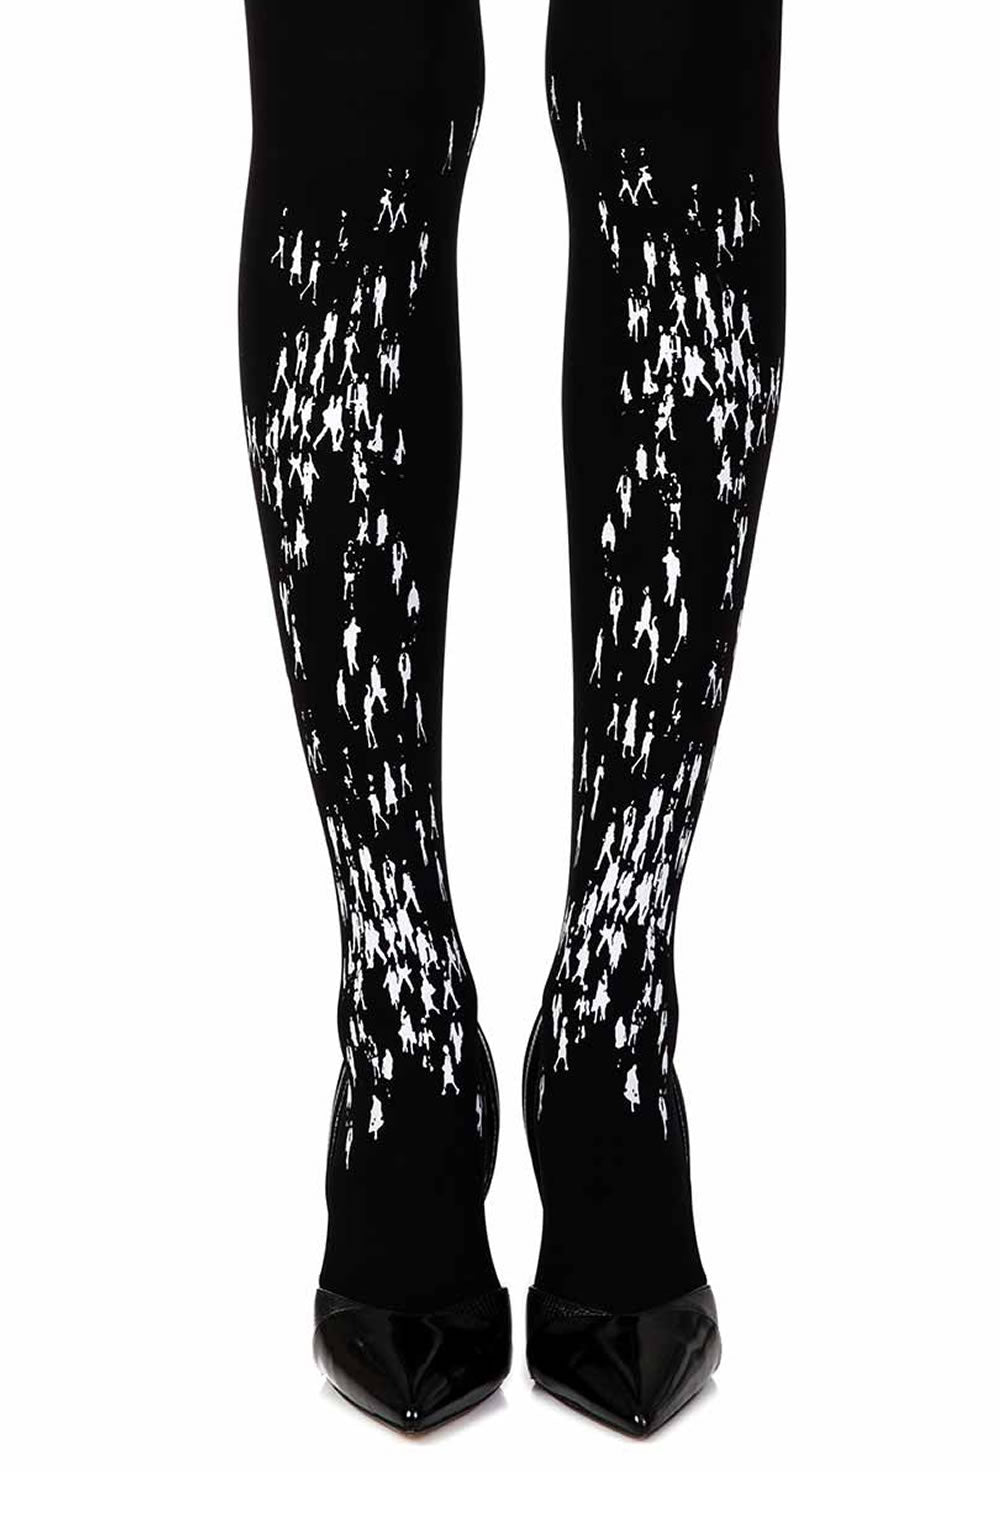 Zohara “Walking By” Black Print Tights  Hosiery, NEWLY-IMPORTED, Tights, Zohara - So Luxe Lingerie